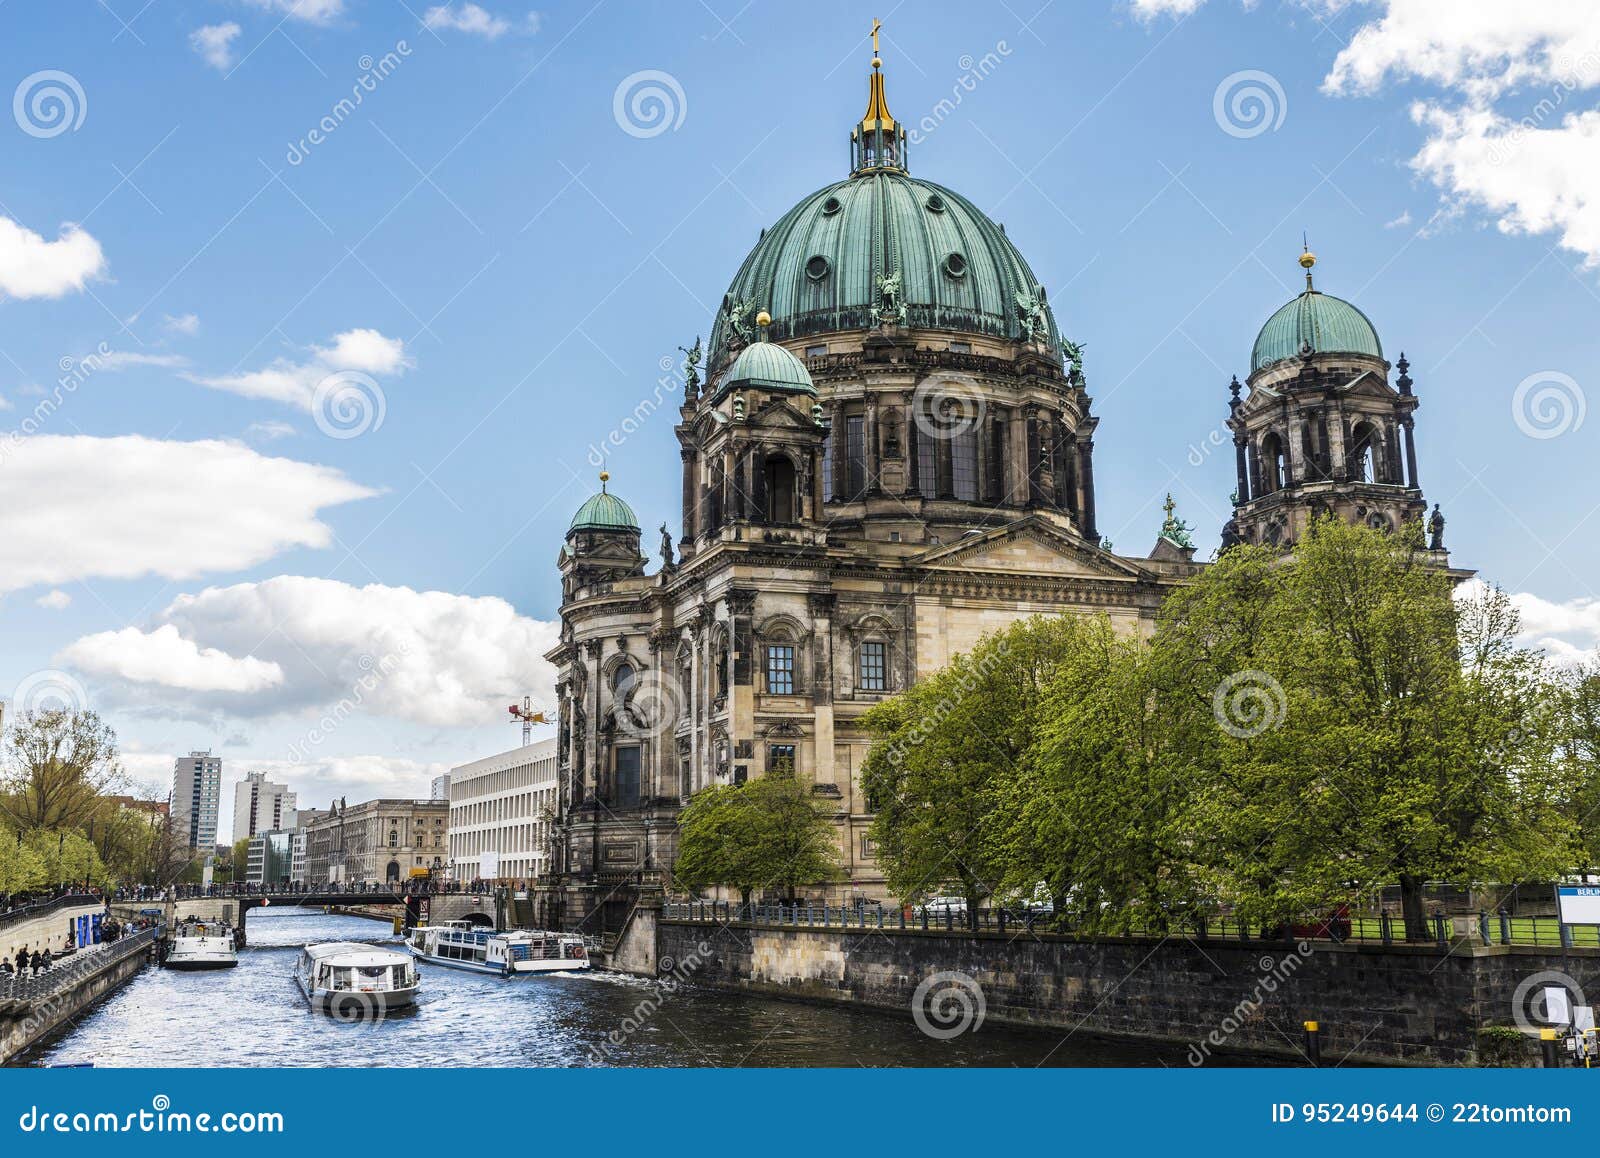 the berlin cathedral berliner dom in berlin, germany